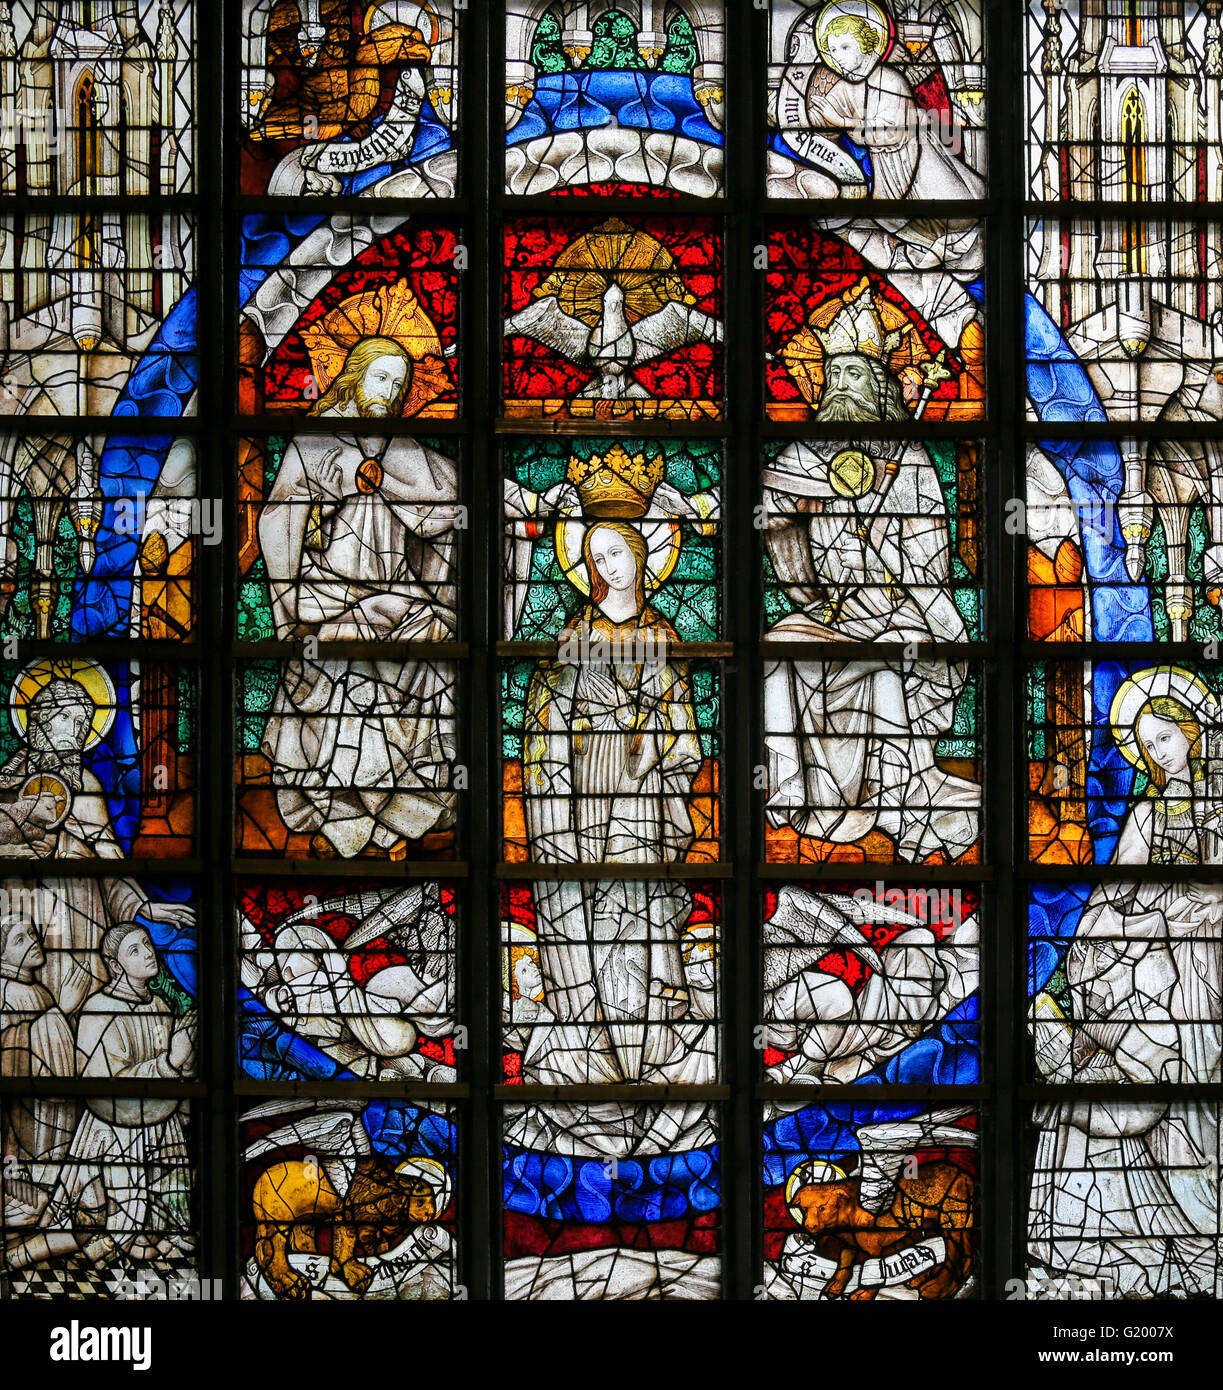 LIER, BELGIUM - MAY 16, 2015: Stained Glass window (1450) in St Gummarus Church in Lier, Belgium, depicting the Coronation of Ma Stock Photo